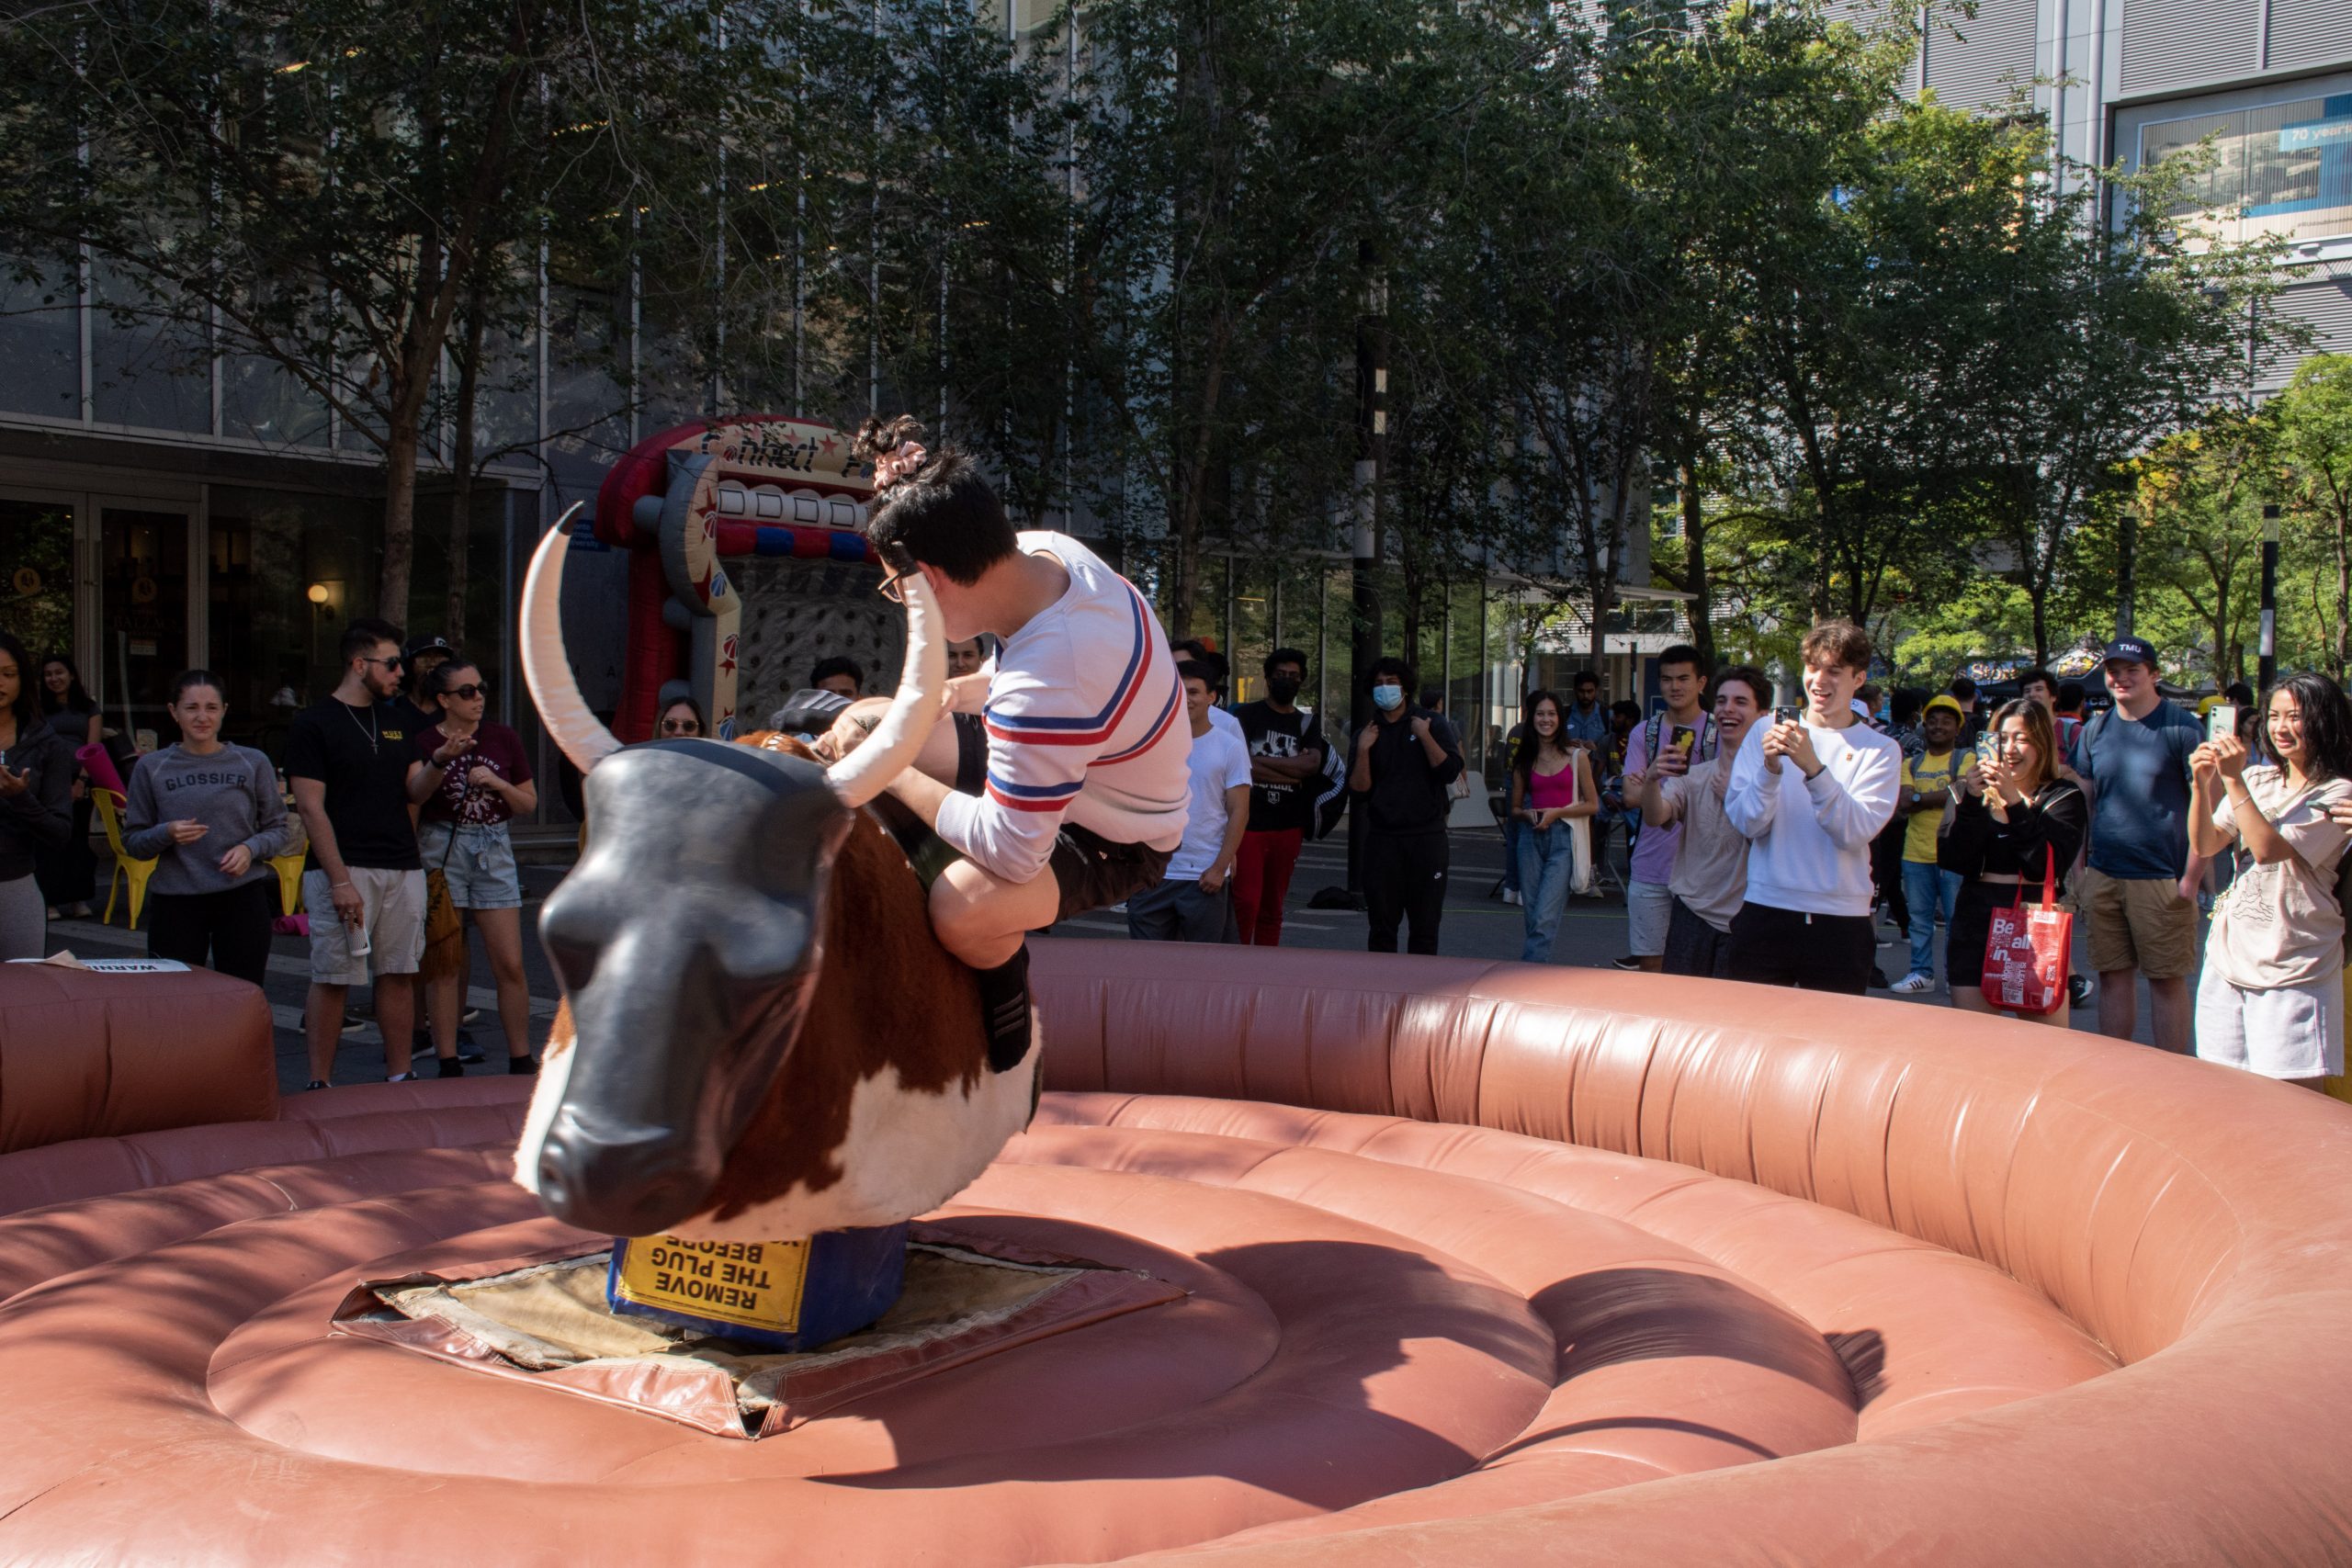 boy riding mechanical bull and falling off